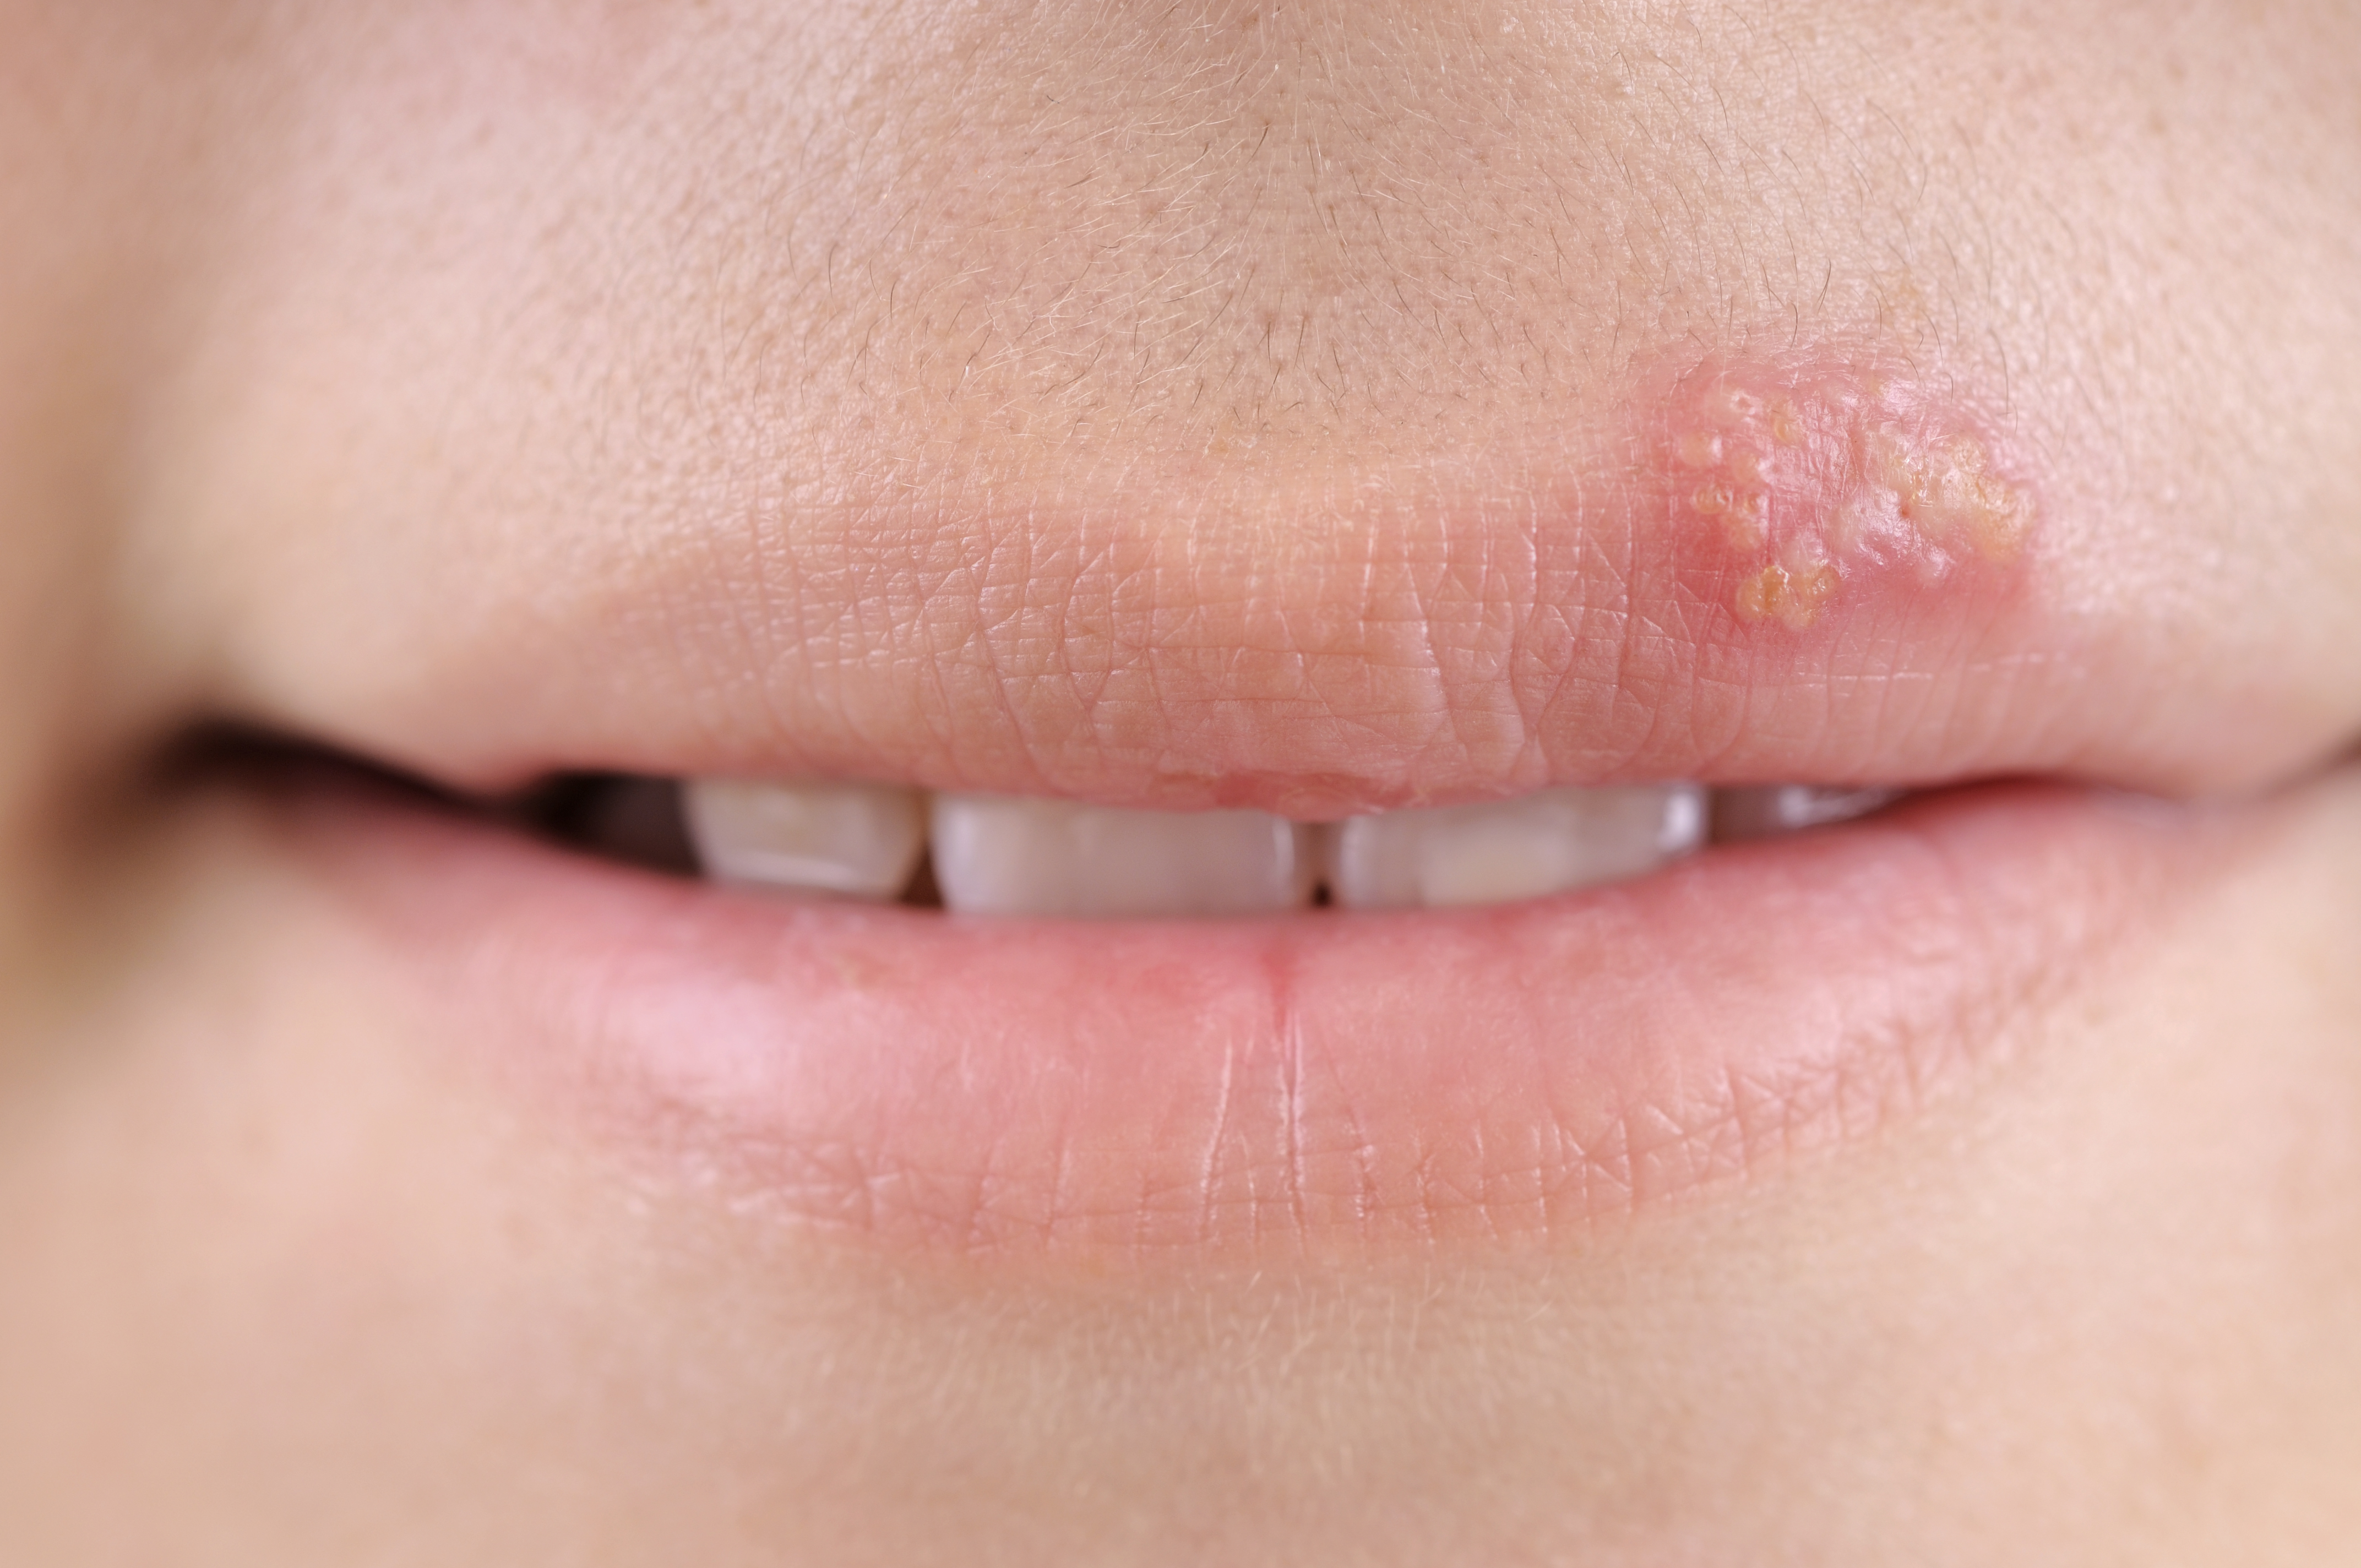 Close-up of a person’s lips during the early and healing stages of a cold sore.